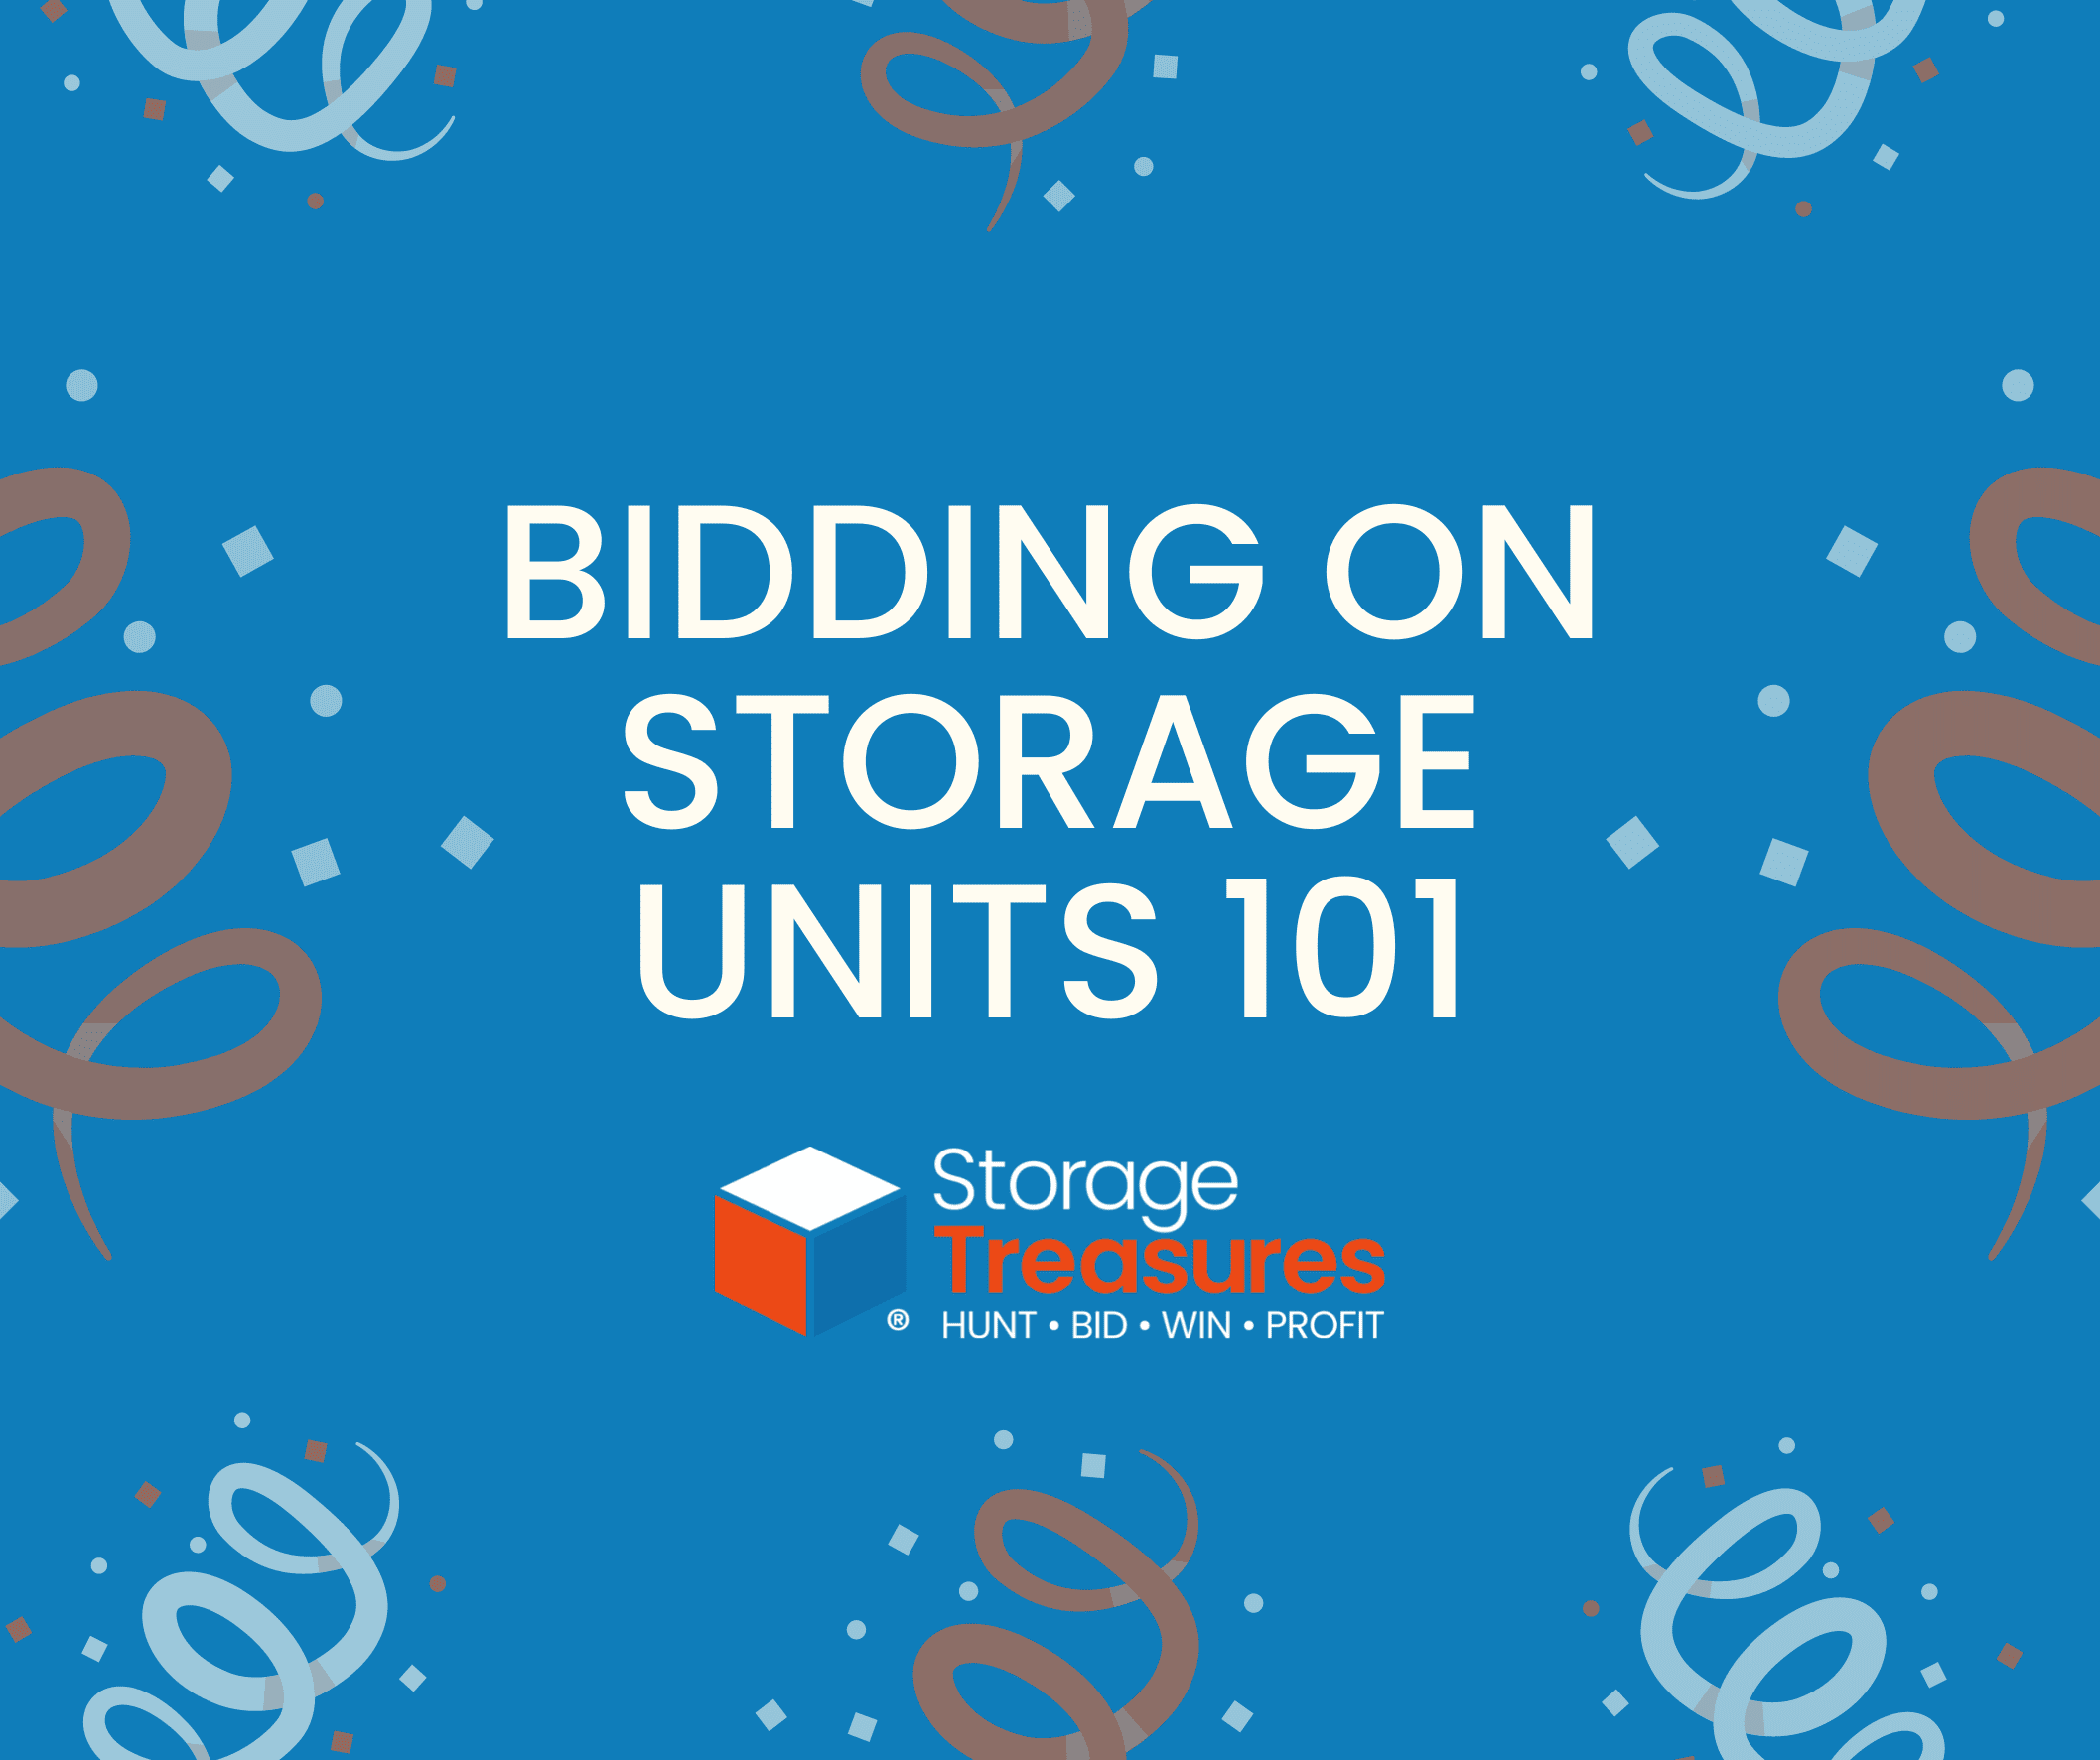 Learn all about bidding on storage units